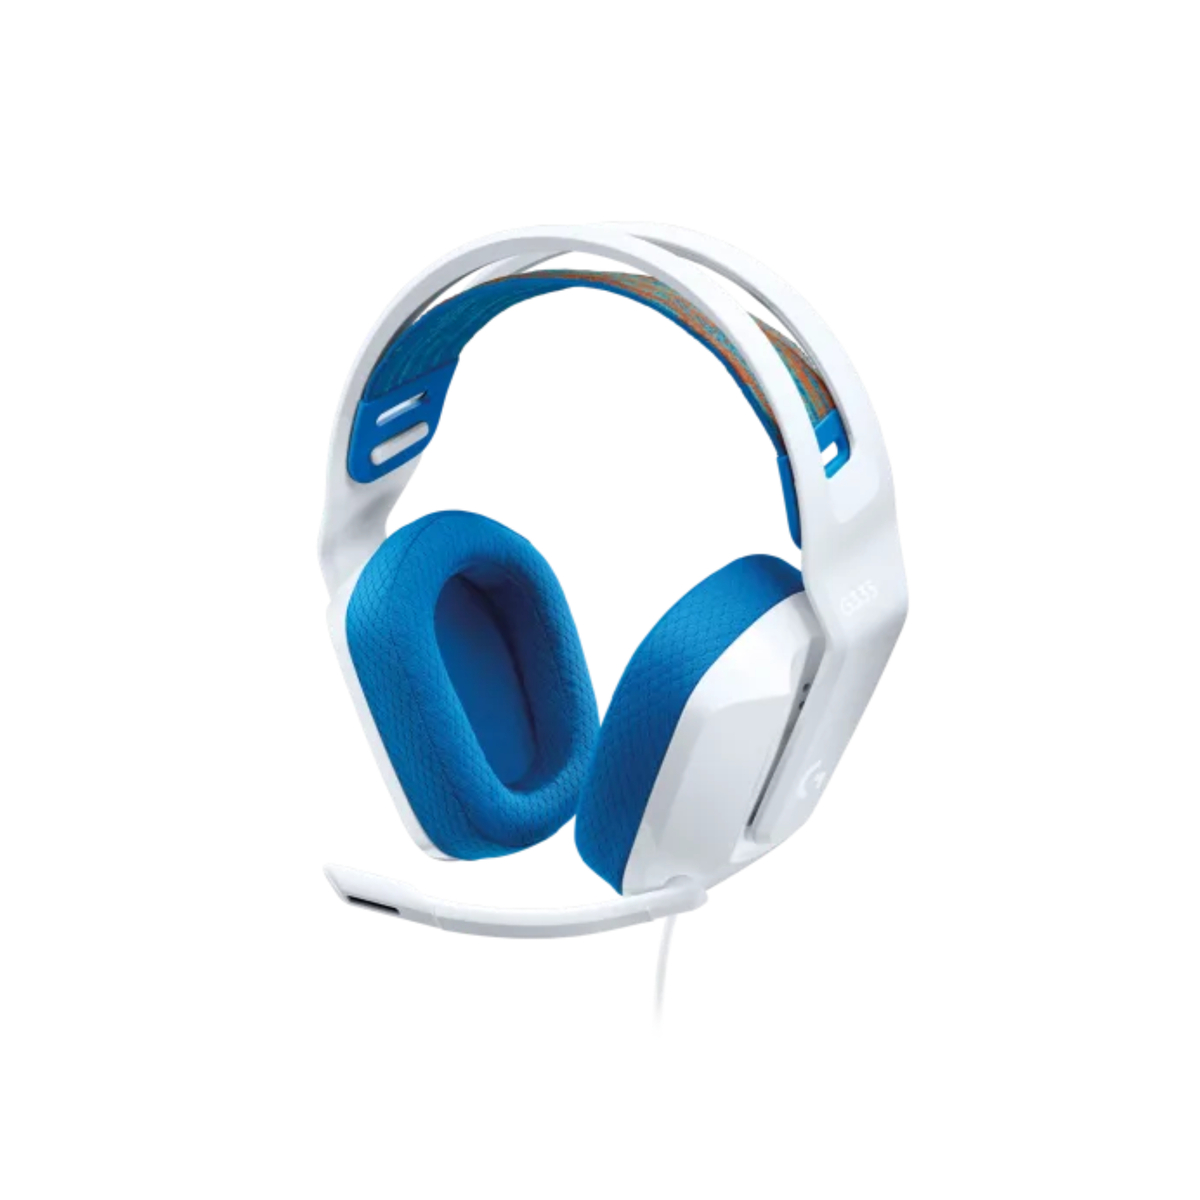 Logitech Wired Gaming Headset, White, G335